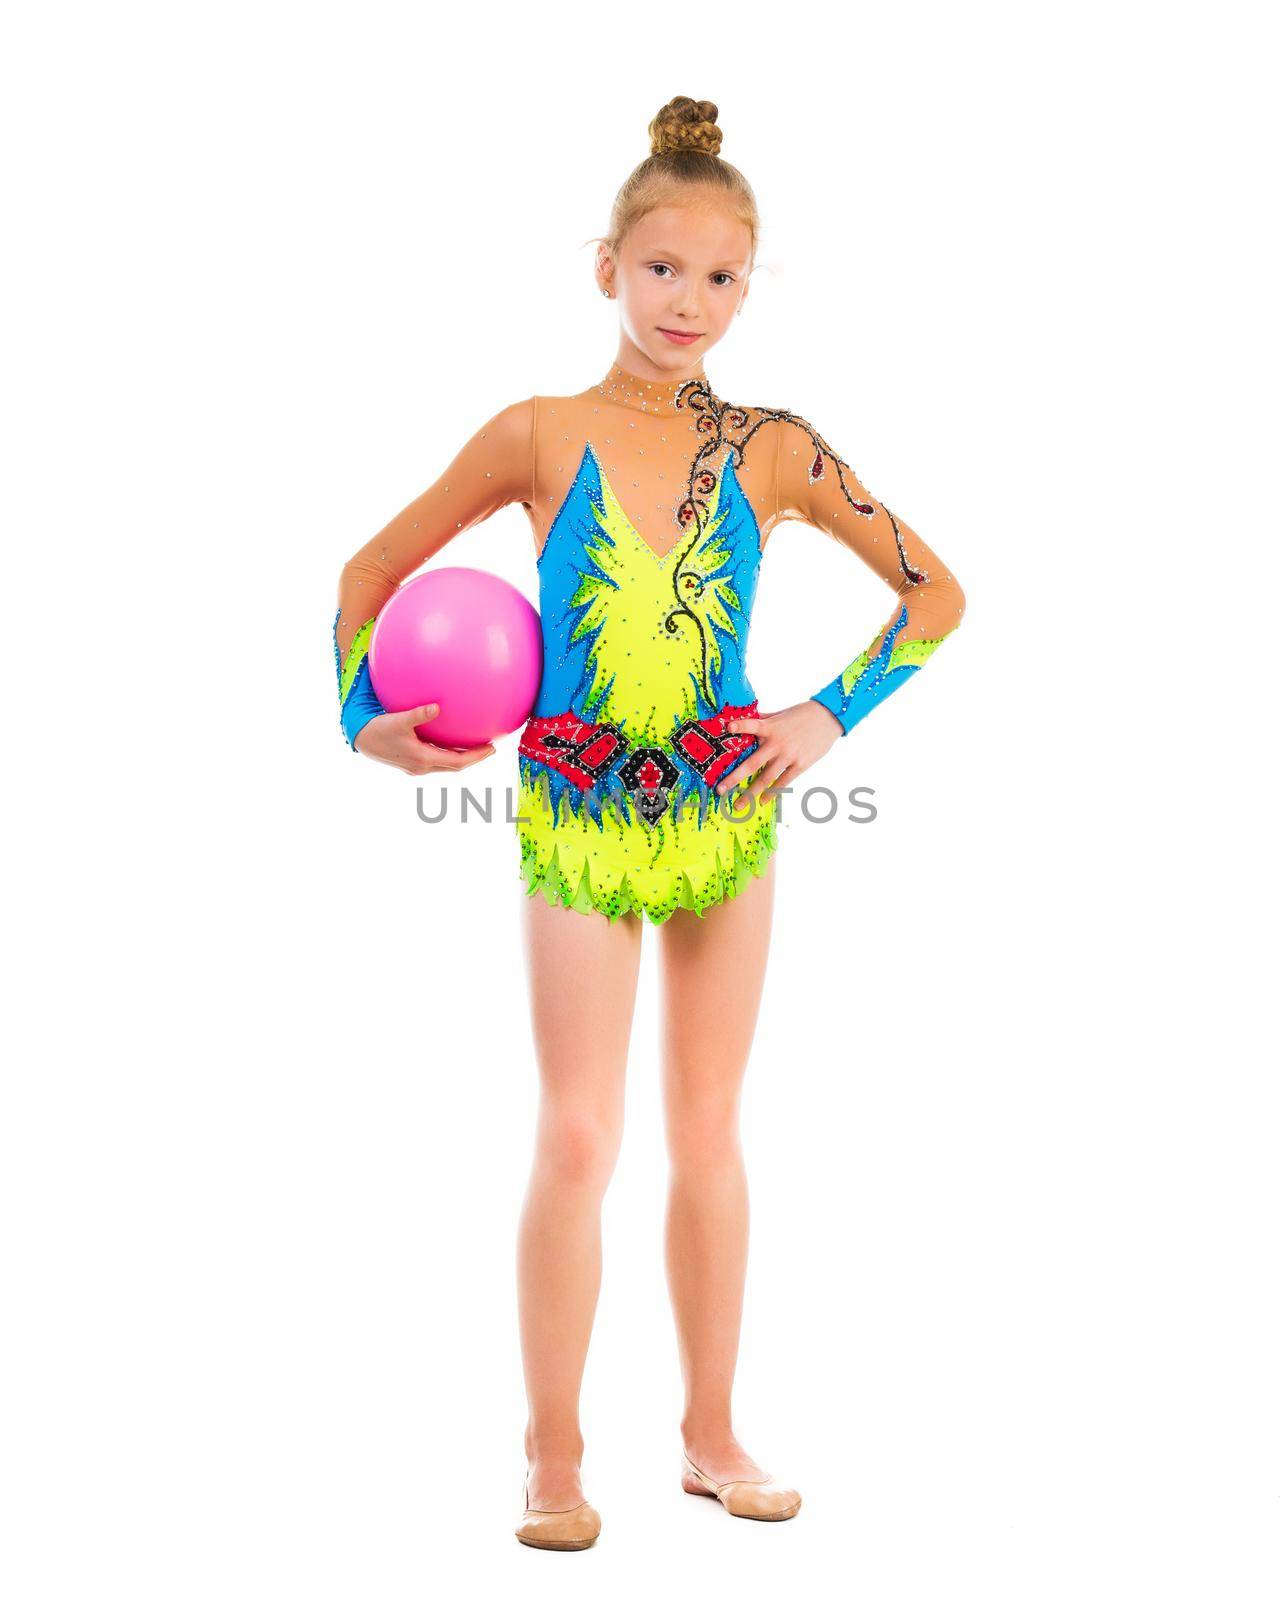 little gymnast doing an exercise with ball isolated on white background